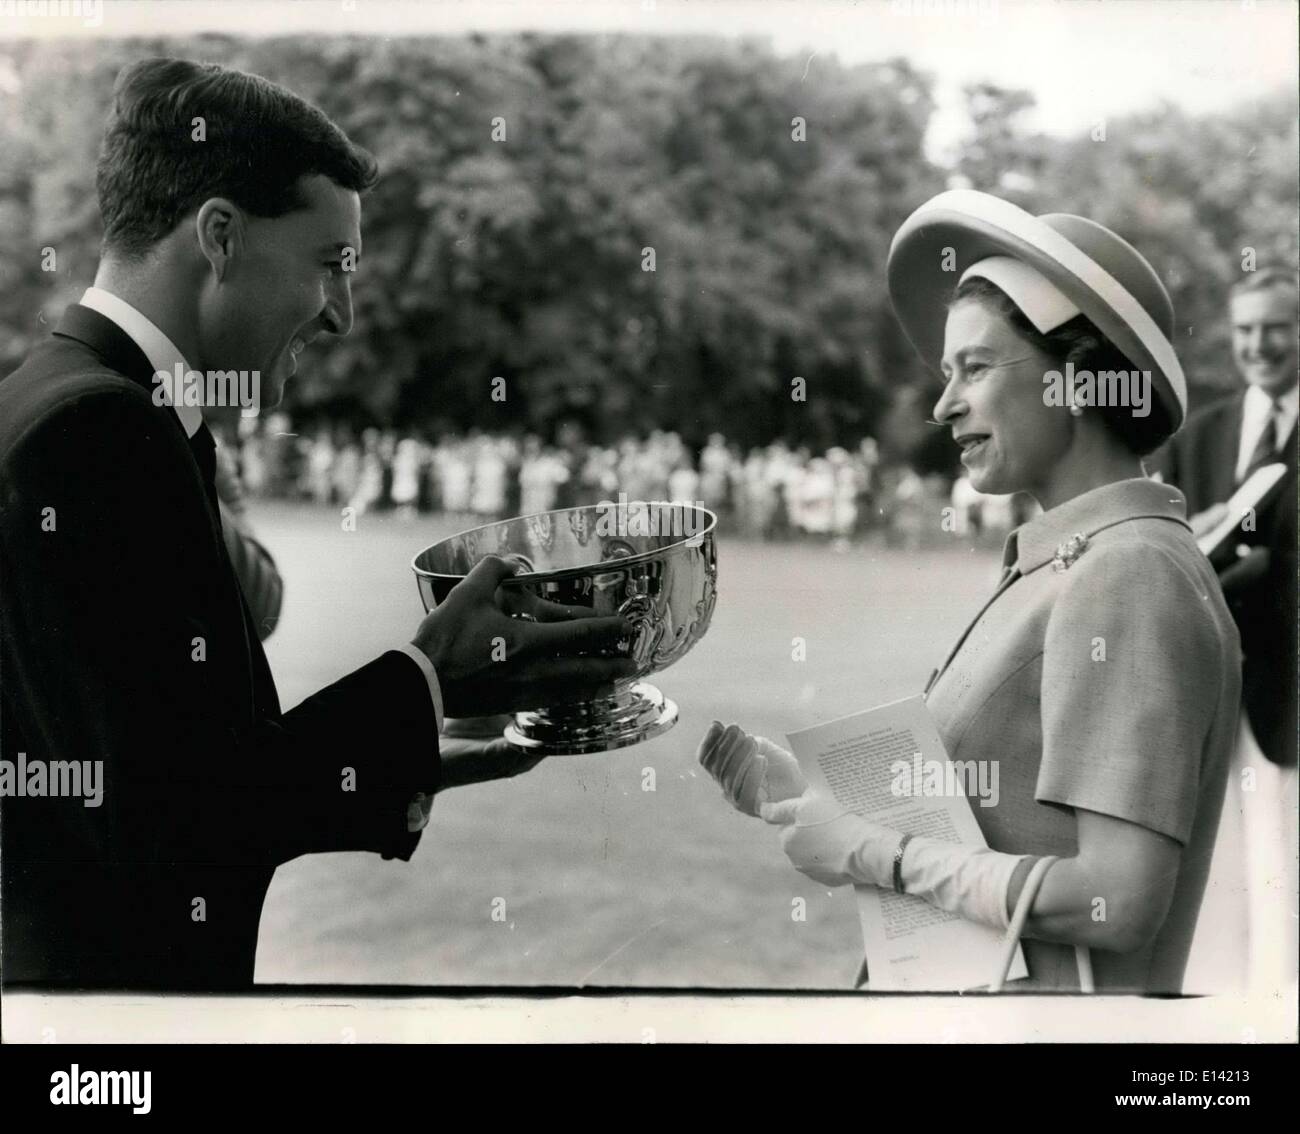 Mar. 31, 2012 - Queen Attends Croquet Championships: This morning the Queen attended the Croquet Association's Centenary All-England Tournament final at Hurlingham Club. Photo shows The Queen presents a cup to Lt Commander Sinclair after he had won final of the All-England Centenary Handicap, at Hurlingham Club today. Stock Photo